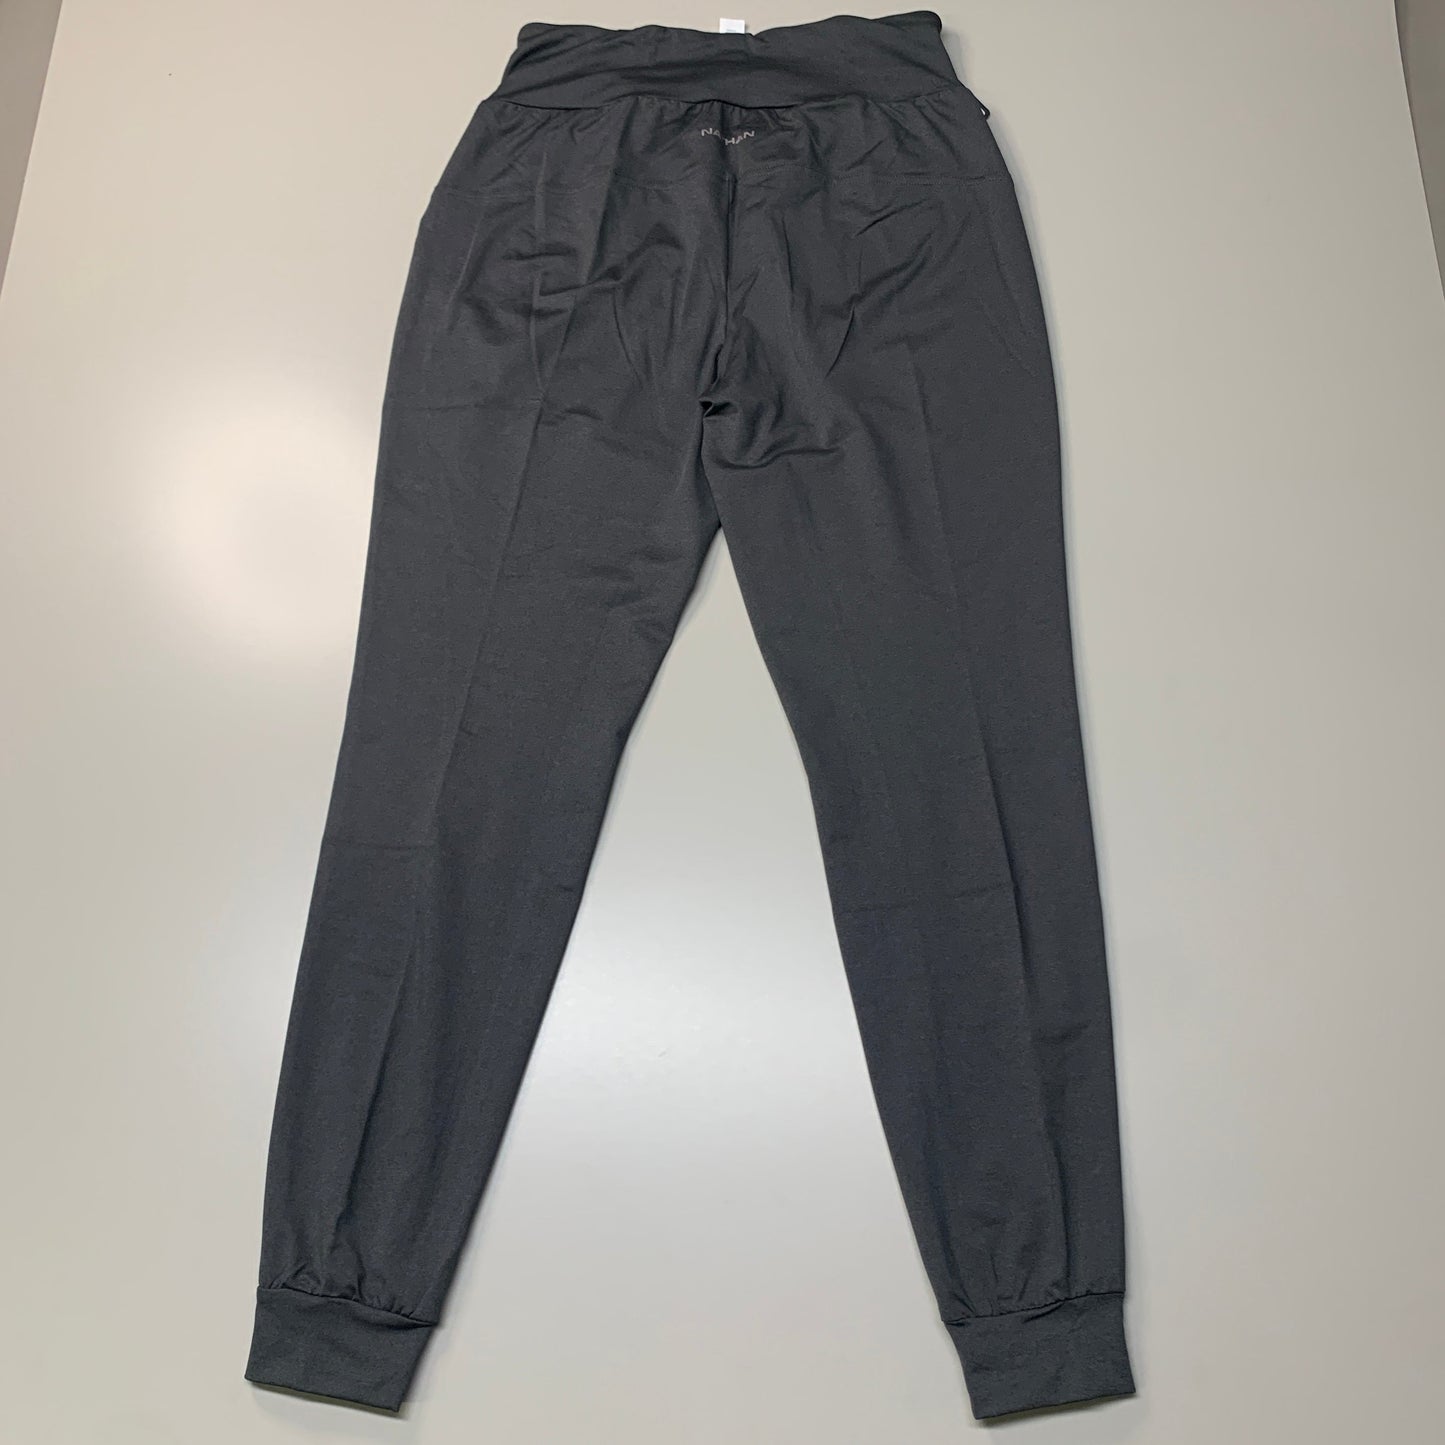 NATHAN 365 Jogger Women's Dark Charcoal Size S NS50640-80078-S